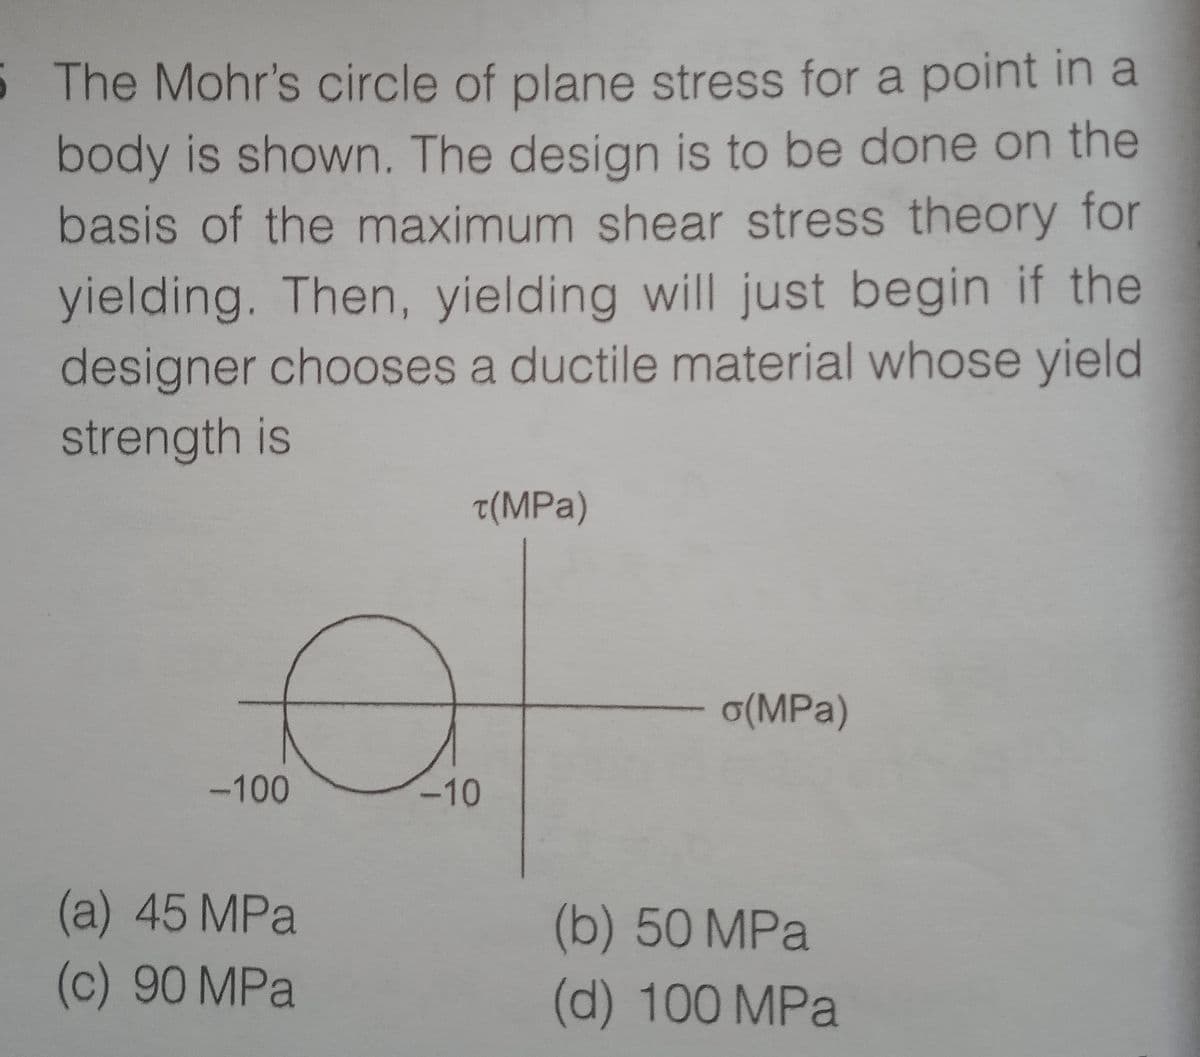 5 The Mohr's circle of plane stress for a point in a
body is shown. The design is to be done on the
basis of the maximum shear stress theory for
yielding. Then, yielding will just begin if the
designer chooses a ductile material whose yield
strength is
t(MPa)
o(MPa)
-100
-10
(a) 45 MPa
(c) 90 MPa
(b) 50MPA
(d) 100 MPa
